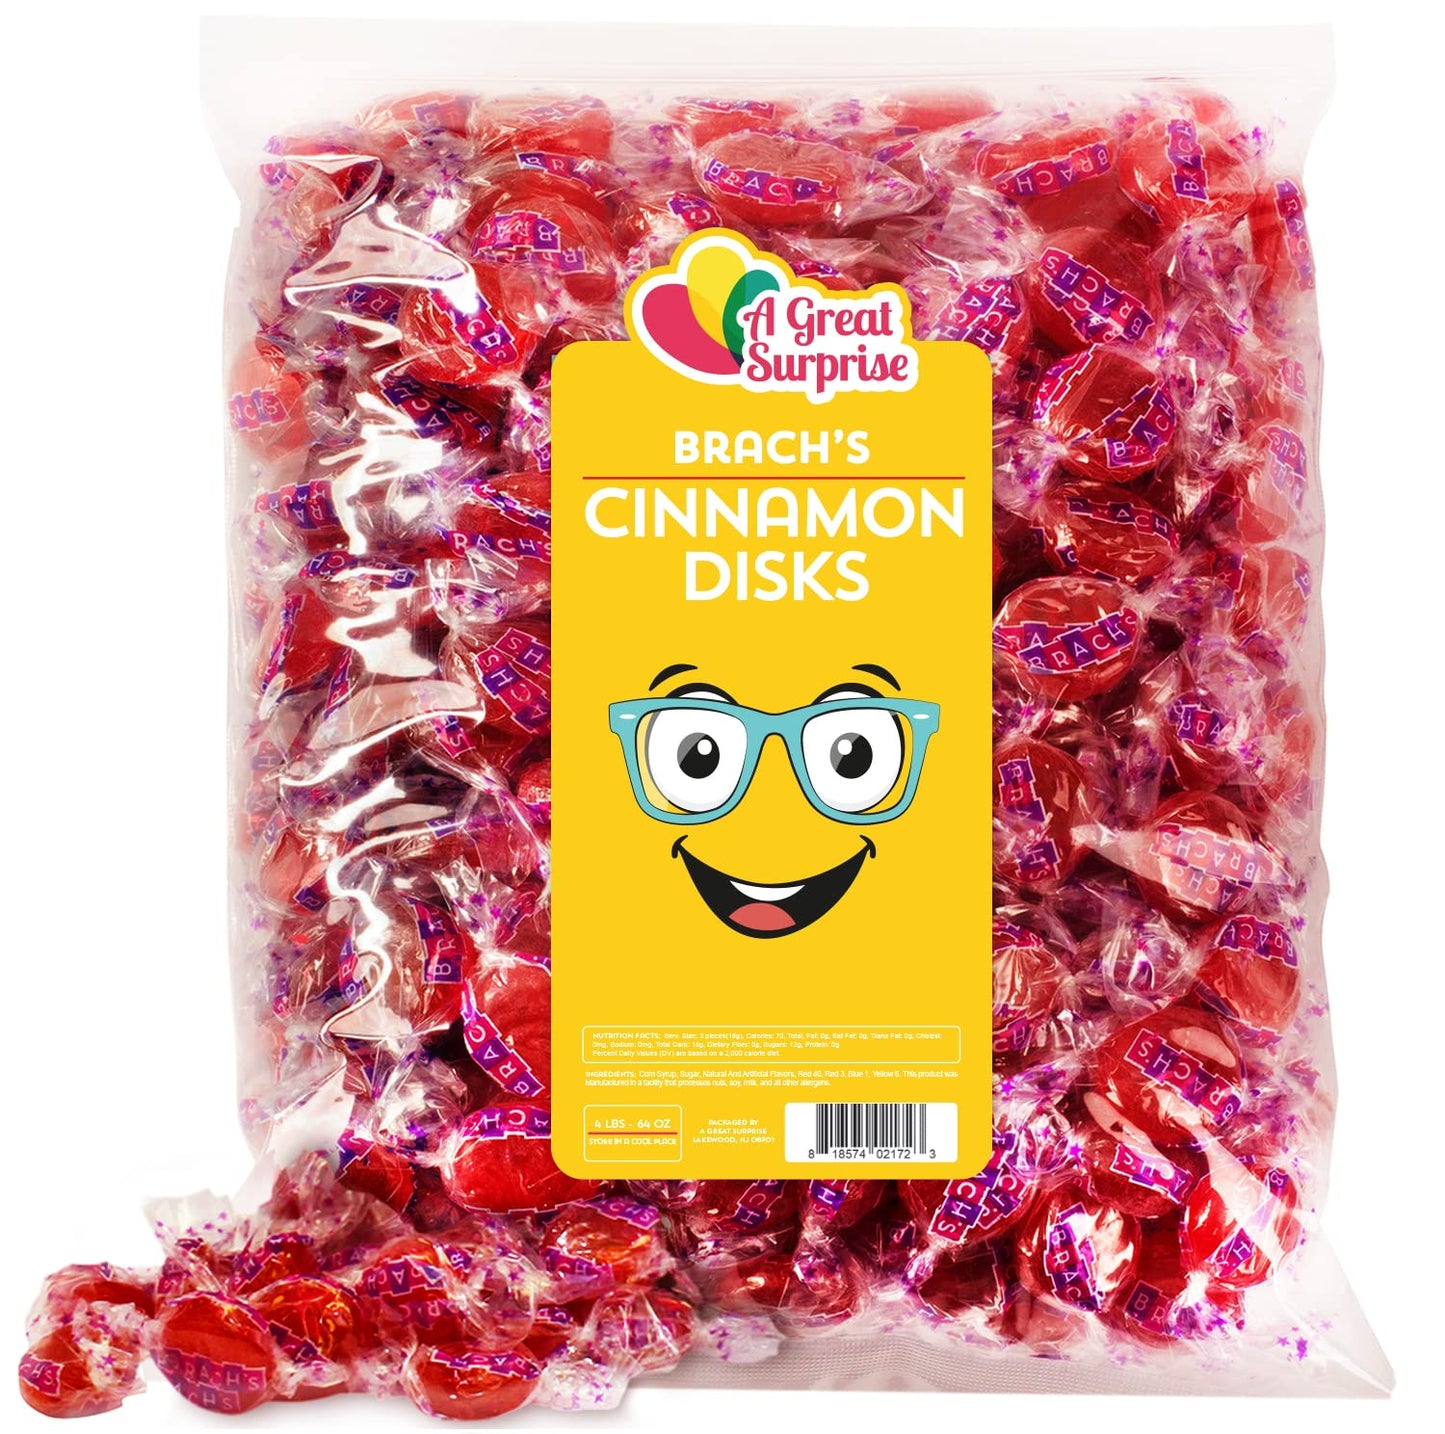 Cinnamon Hard Candy Individually Wrapped - Cinnamon Discs - Red Candy - Bulk Candy 4 LBS